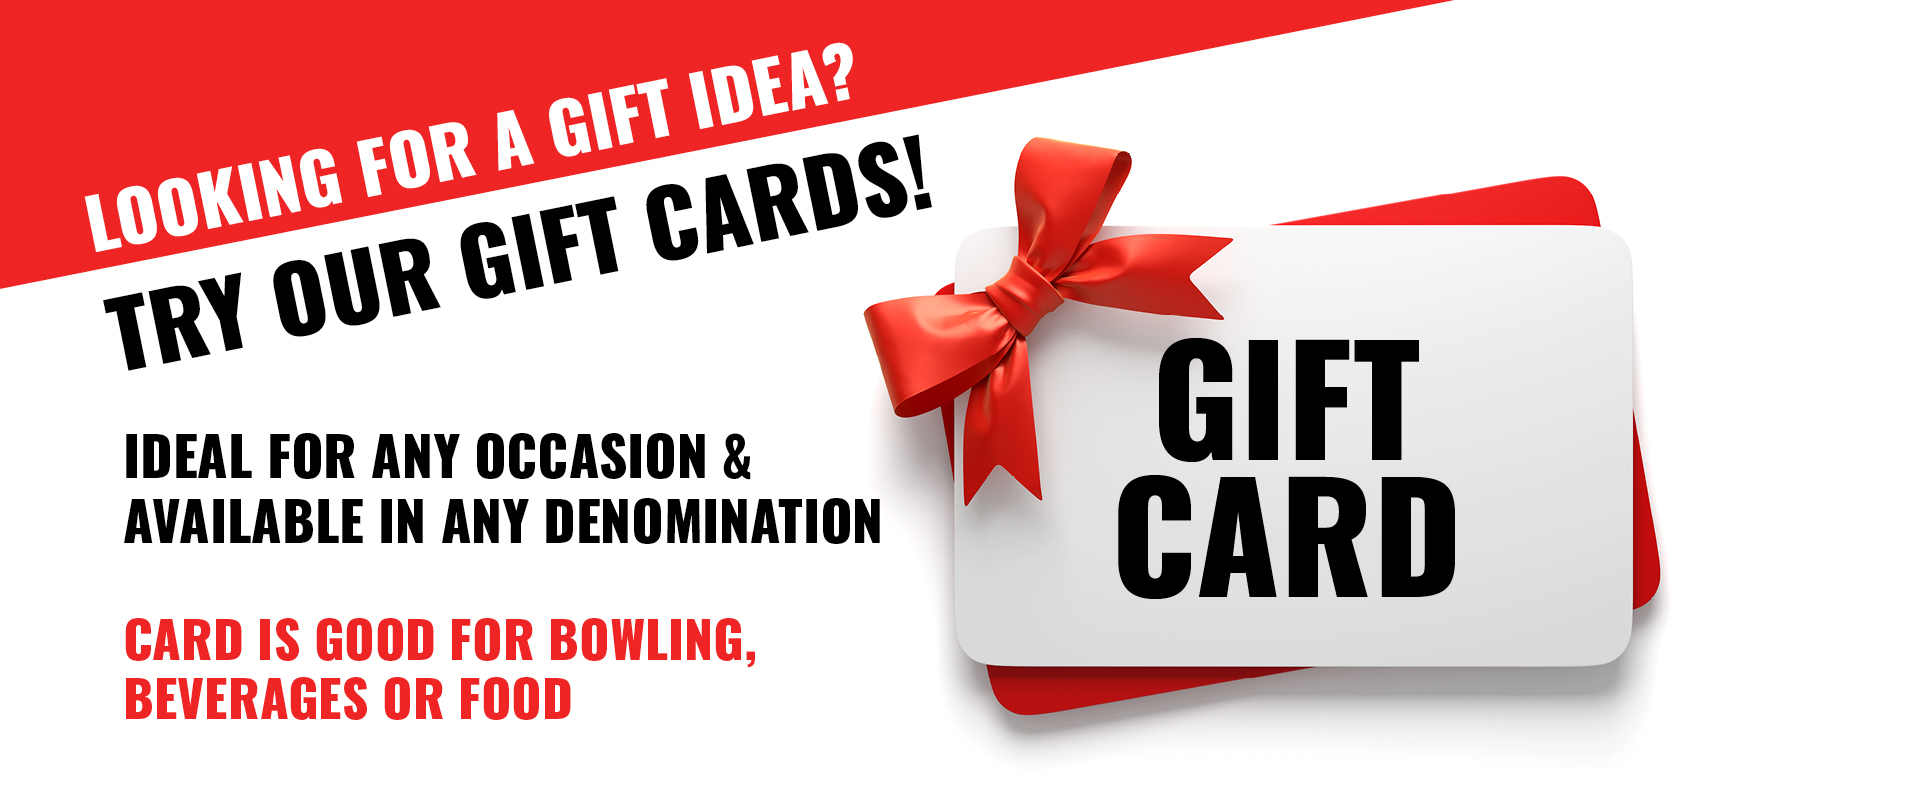 Try our gift cards!